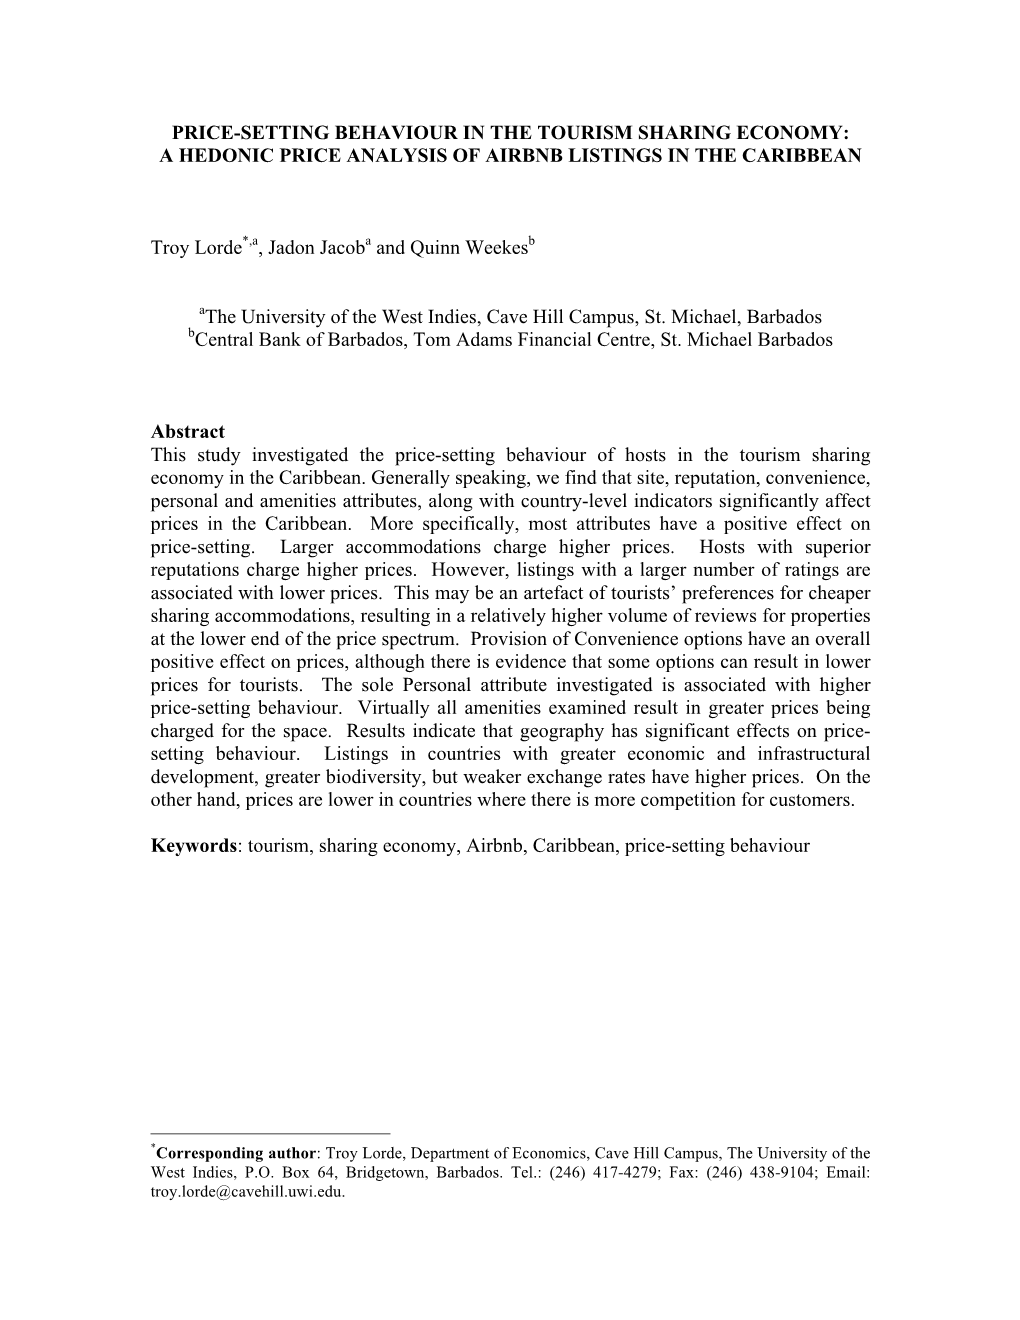 Price-Setting Behaviour in the Tourism Sharing Economy: a Hedonic Price Analysis of Airbnb Listings in the Caribbean